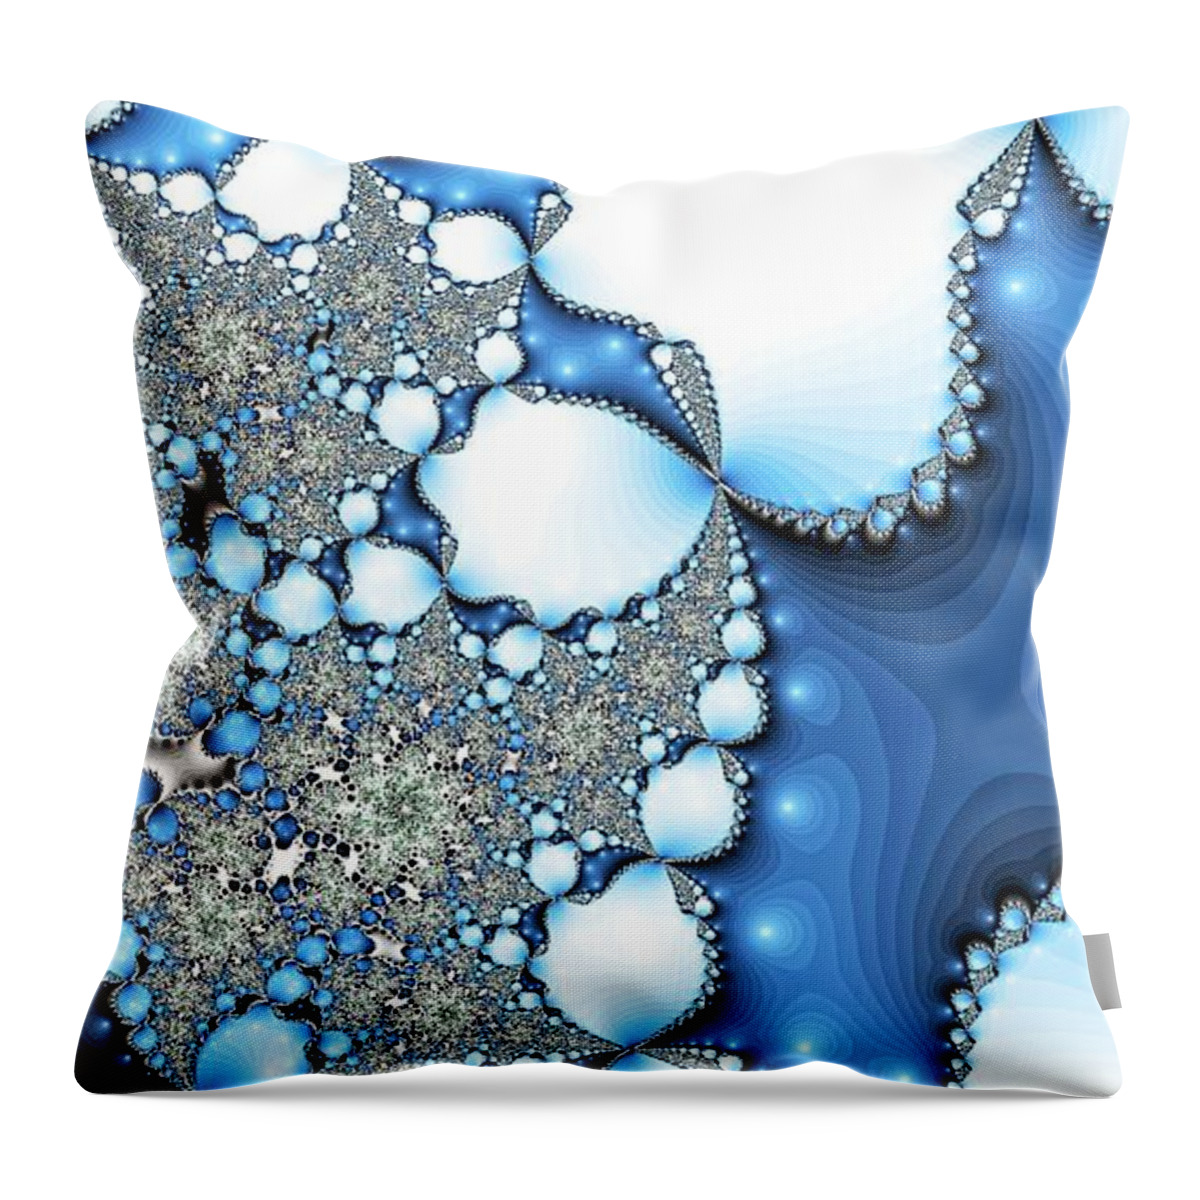 Lake Throw Pillow featuring the digital art Lake Humongous Blue by Don Northup